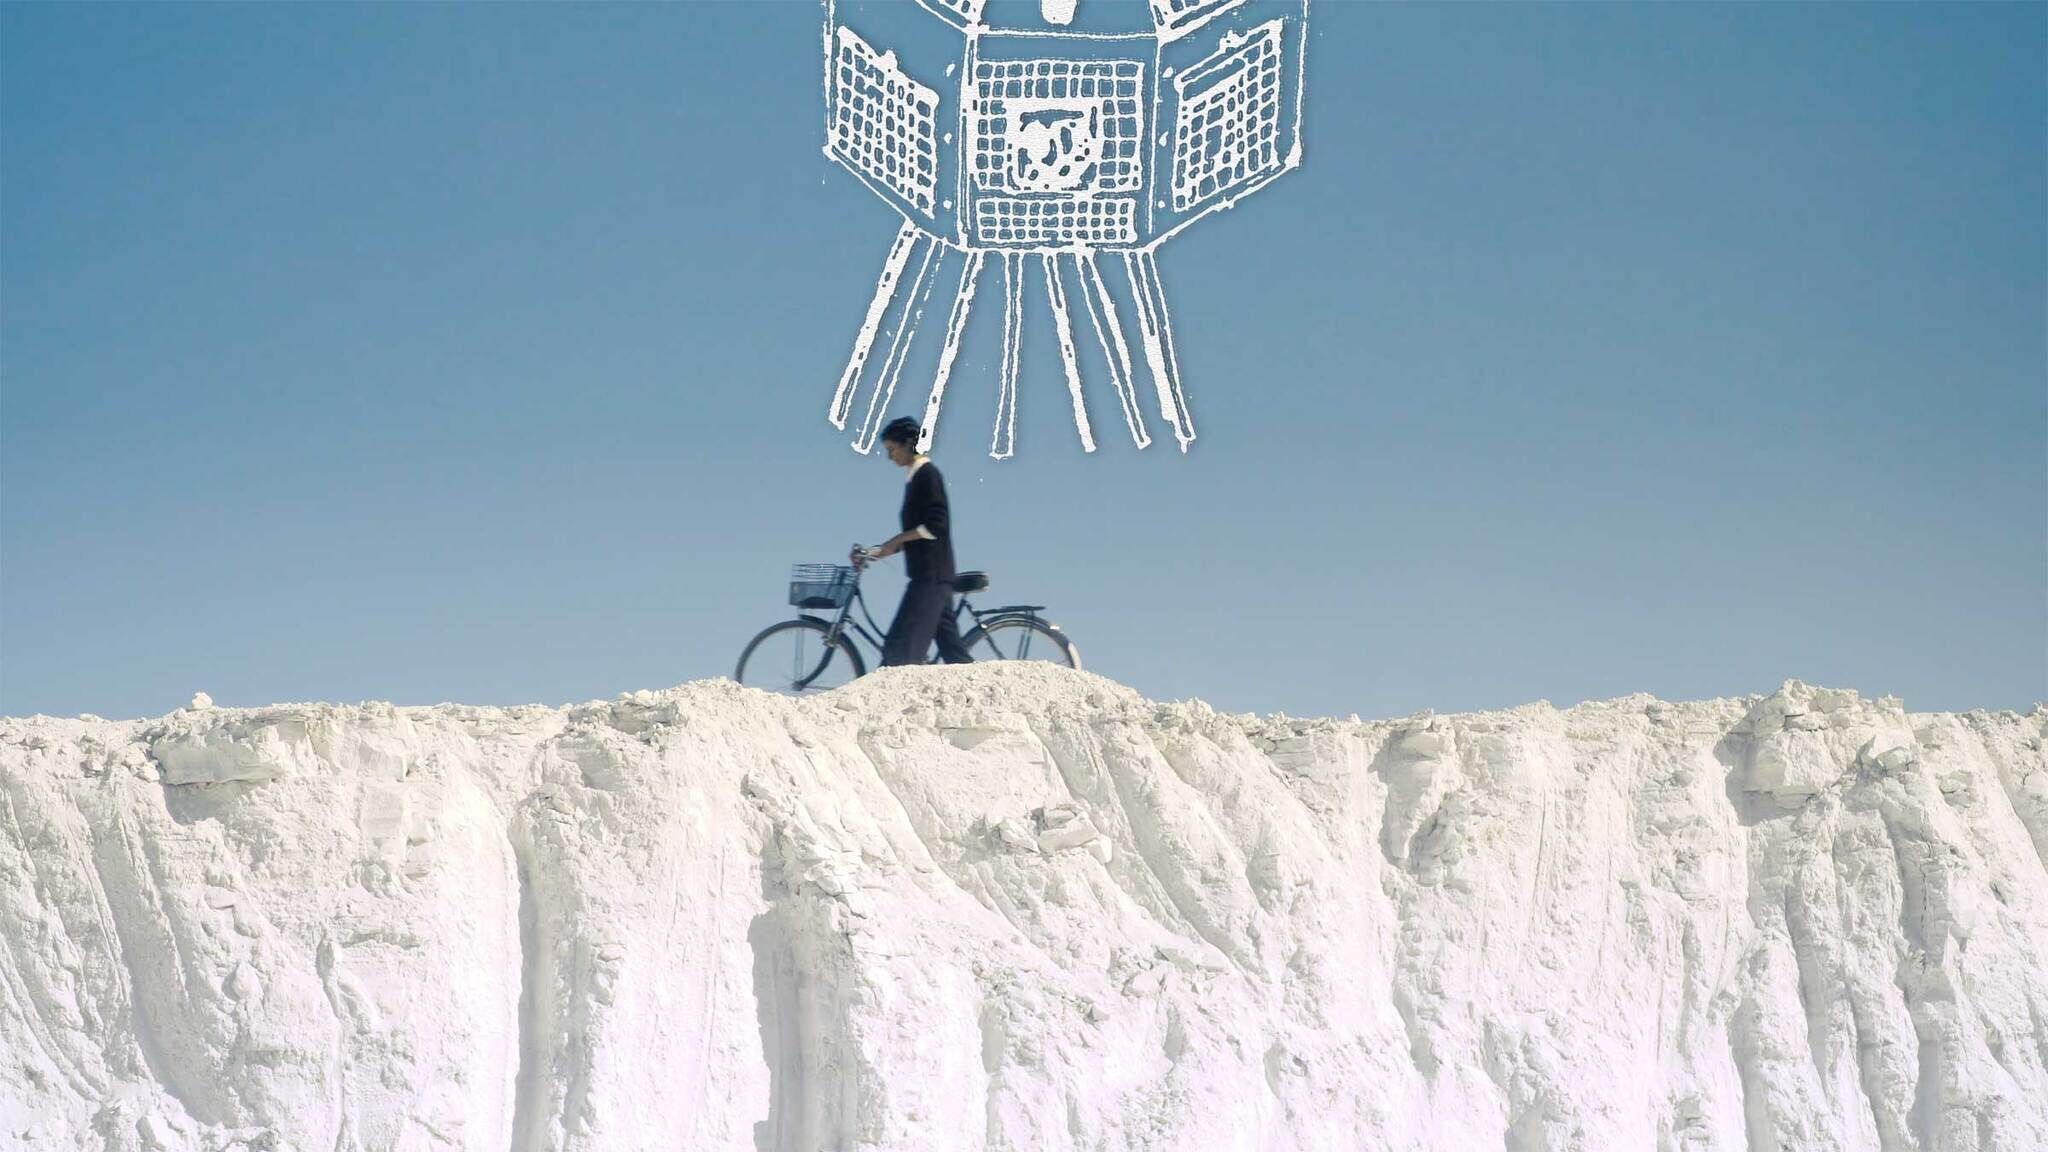 Person cycling on a chalky ridge with a stylized drawing of a satellite overhead against a clear blue sky.